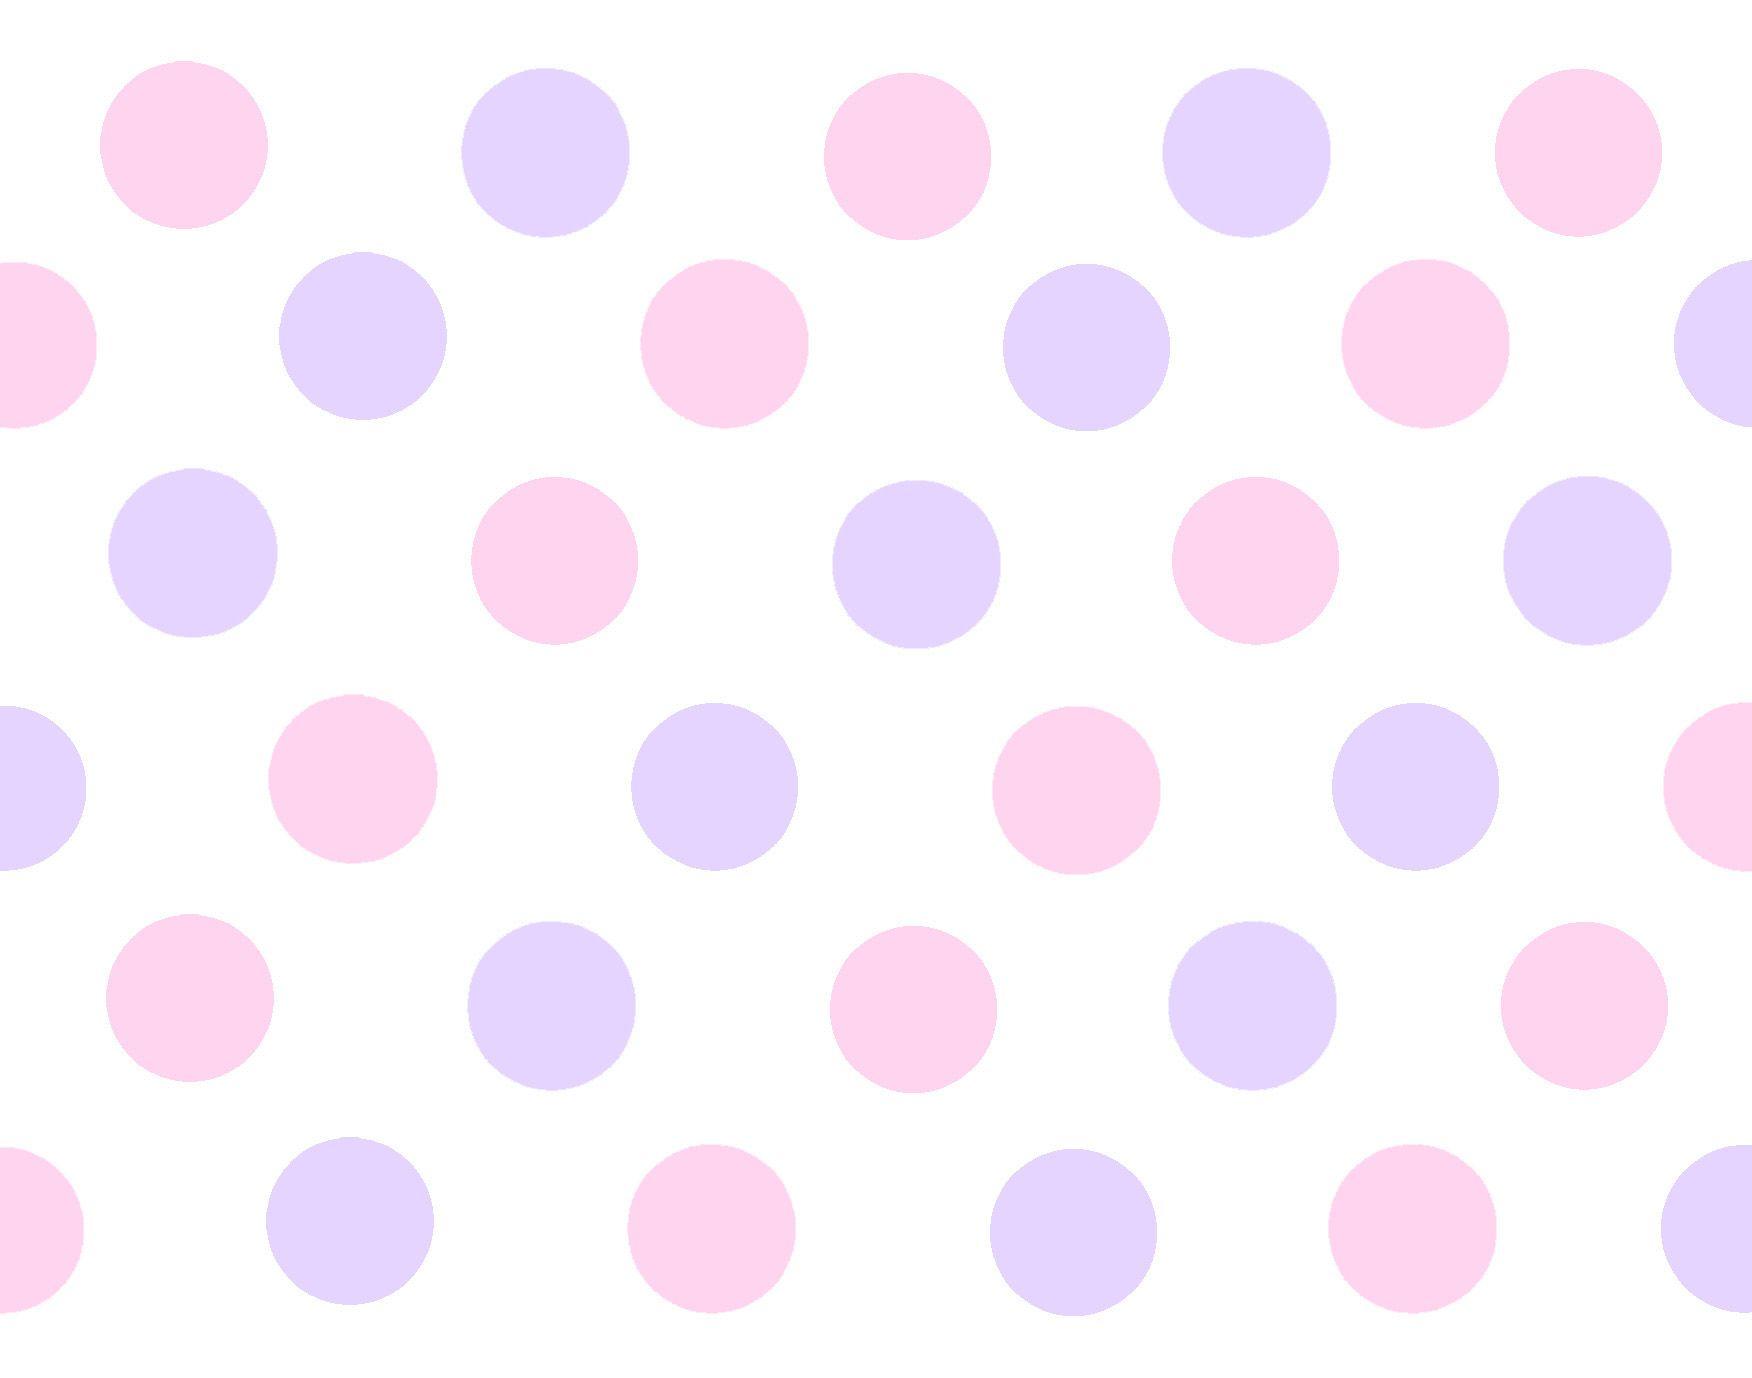 8. Polka Dot Purple, Pink, and White Nails - wide 6